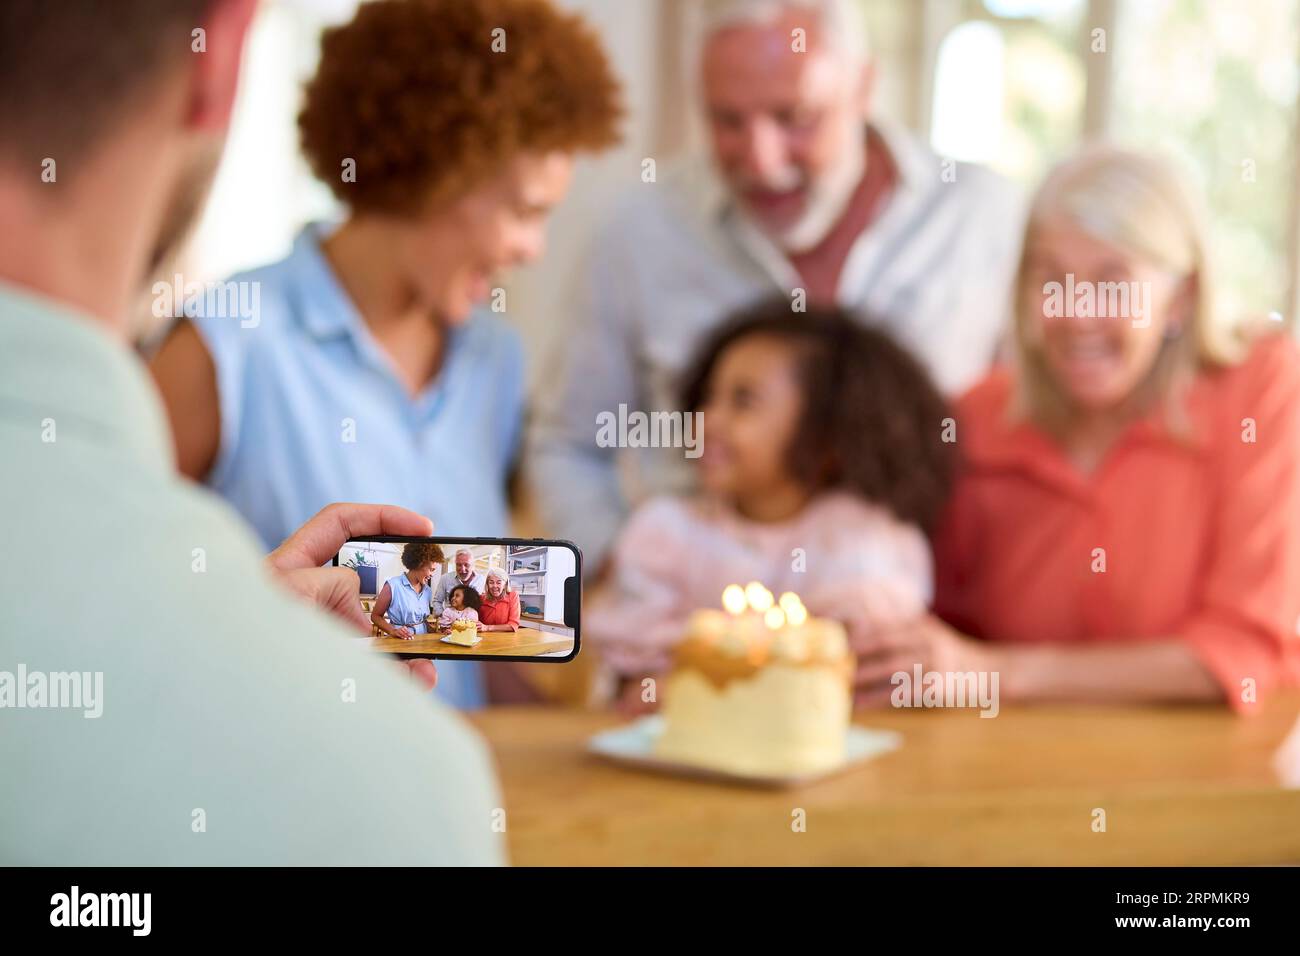 Dad Takes Photo As Multi-Generation Family Celebrate Granddaughter's Birthday At Home With Cake Stock Photo